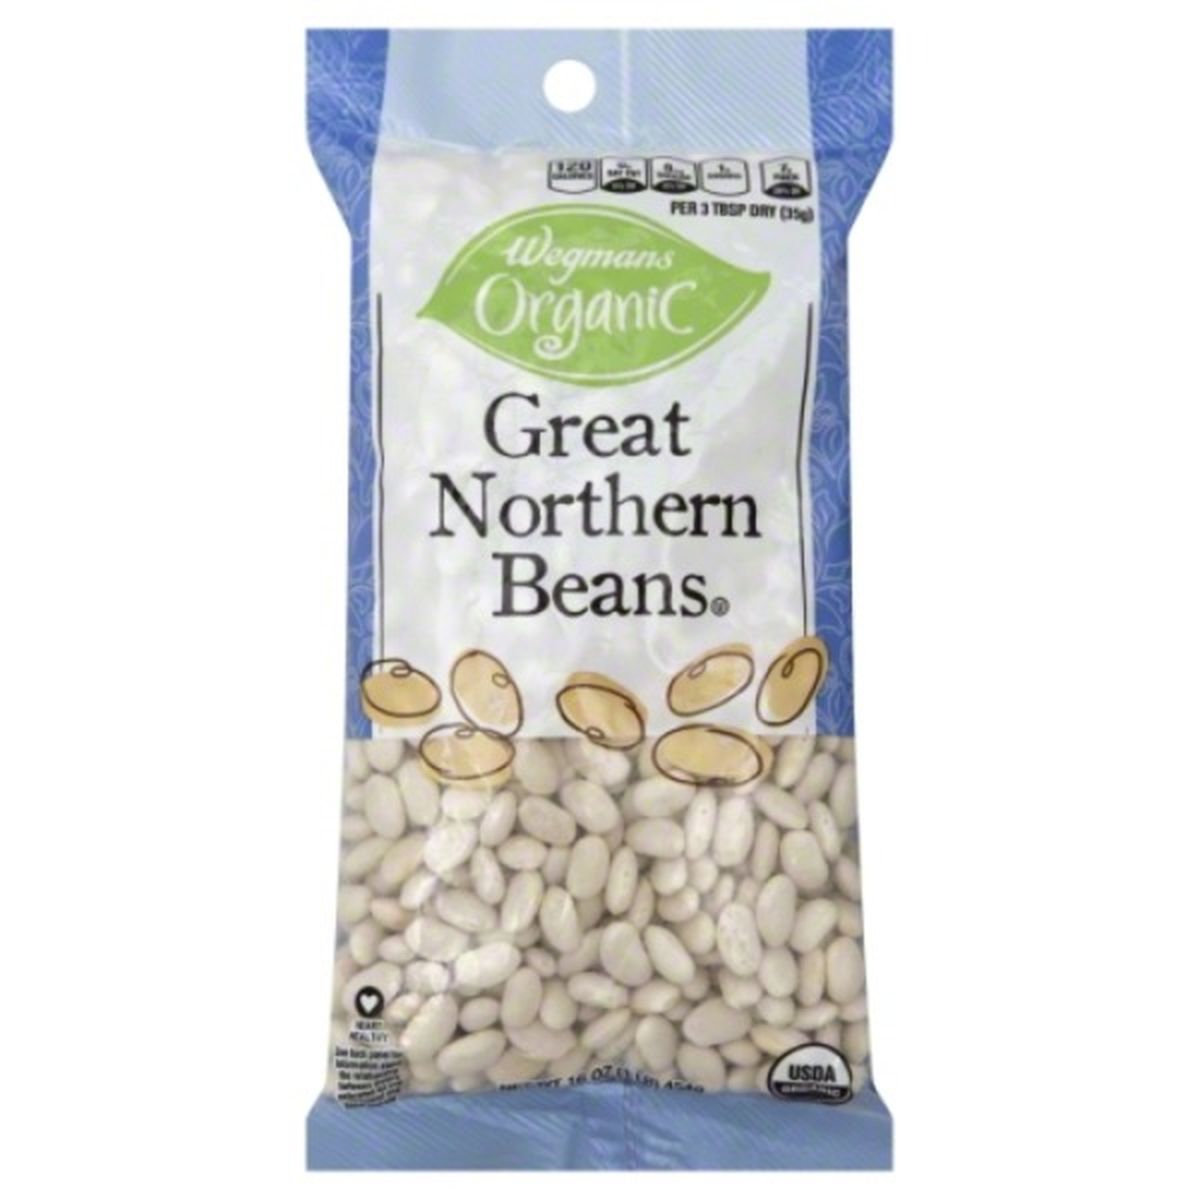 Calories in Wegmans Organic Great Northern Beans, Dry